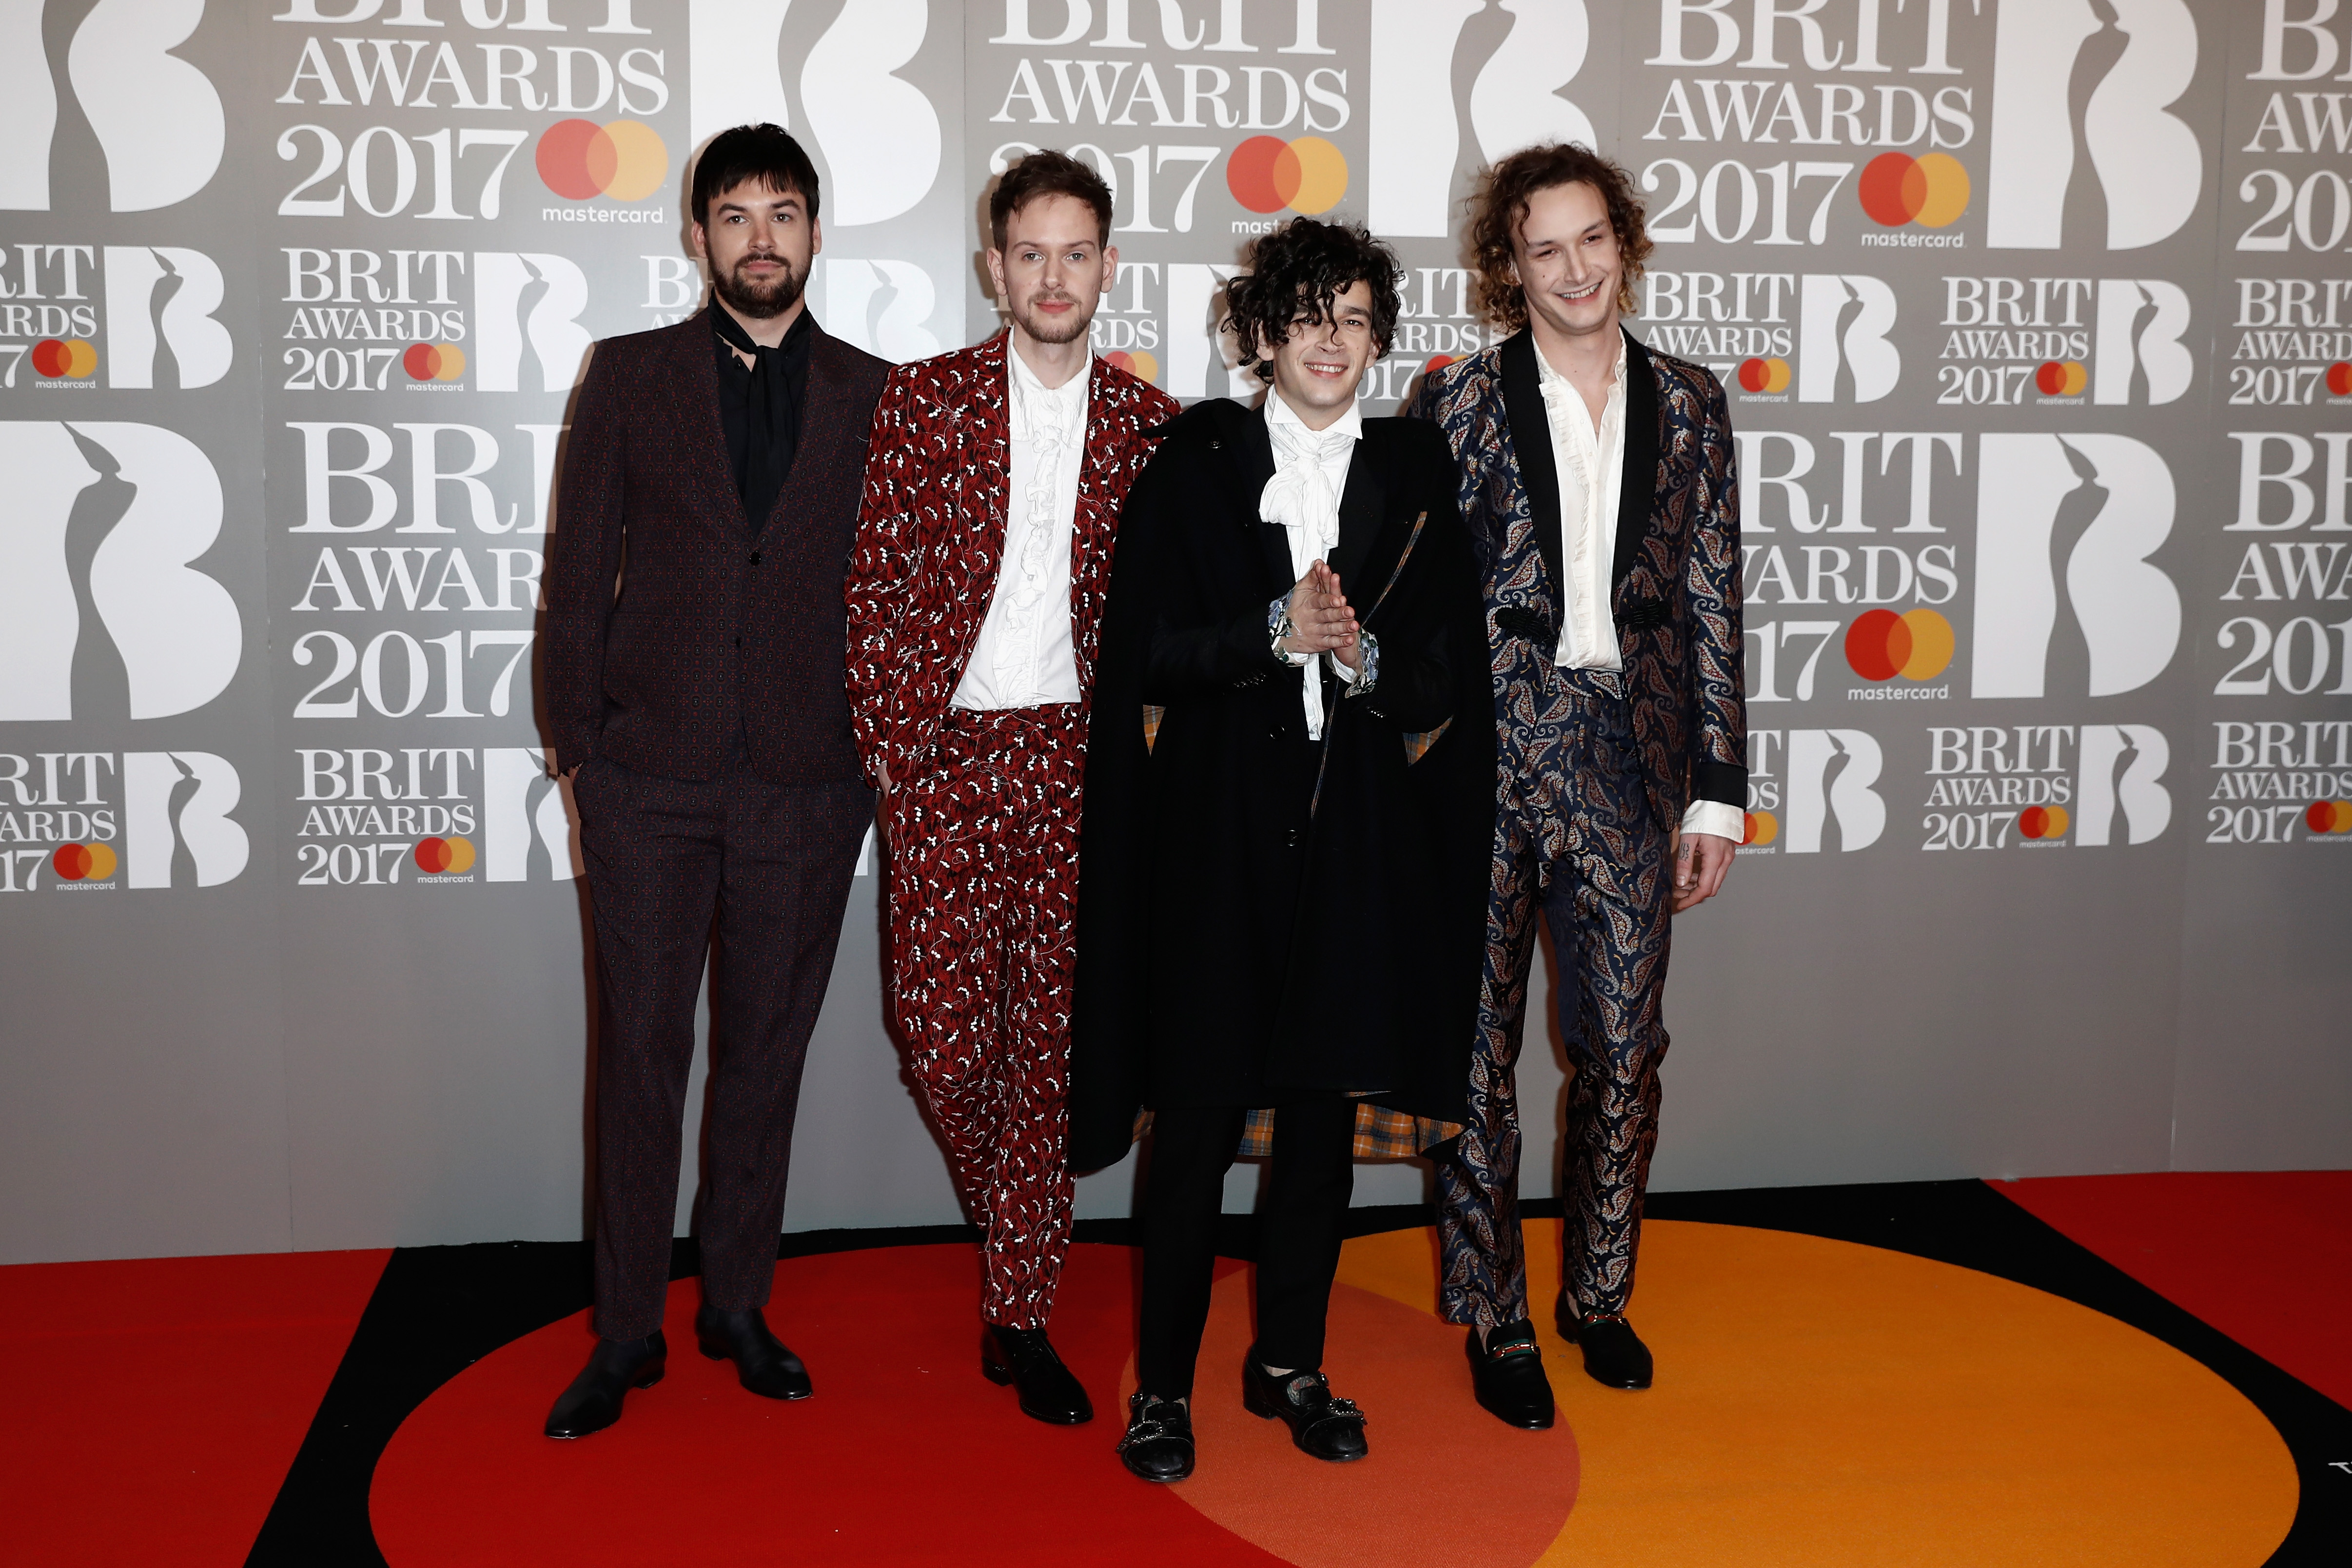 The 1975 attend The BRIT Awards 2017 on February 22, 2017 in London, England. (Photo by John Phillips/Getty Images)